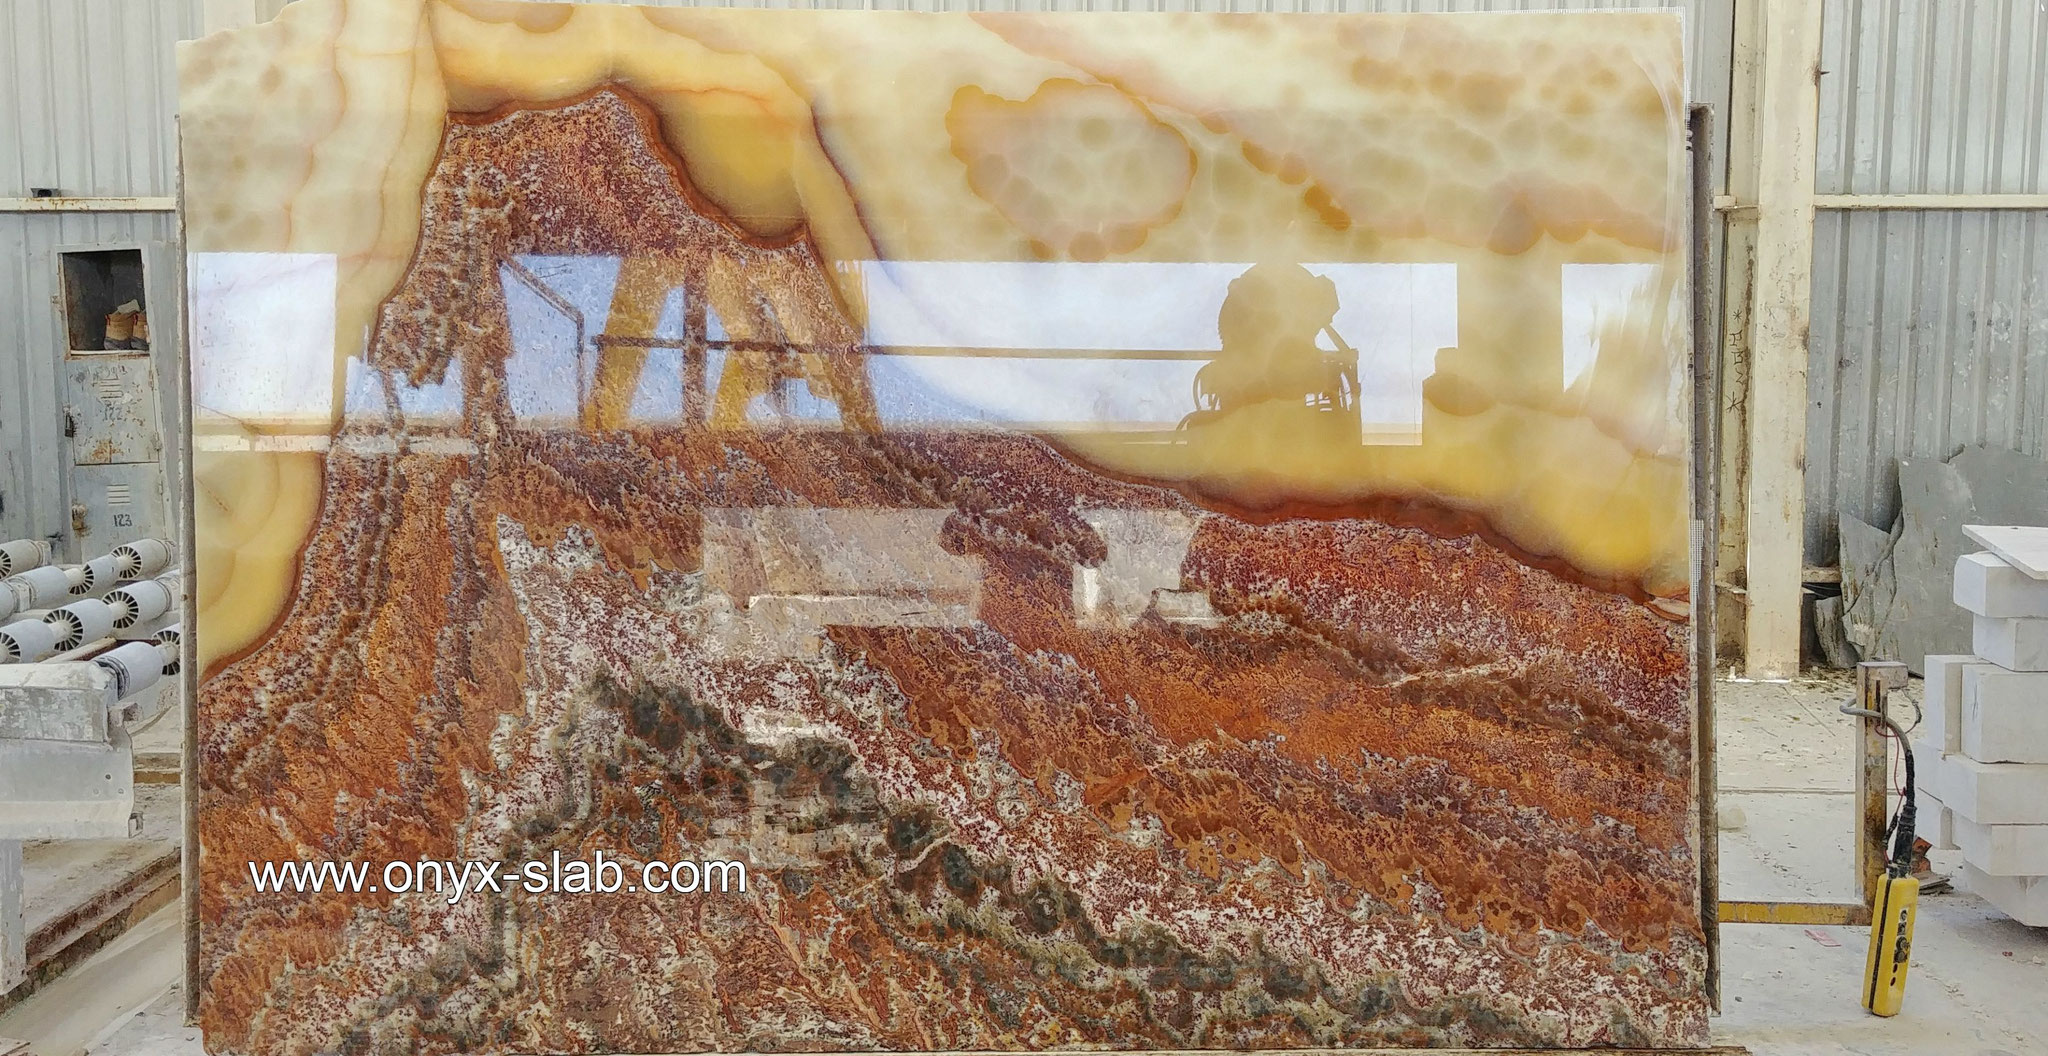 Onyx Slabs, red onyx slabs, Onyx Slabs Price, onyx stone slabs for sale, onyx slab cost, onyx countertops Price, bookmatched onyx slabs